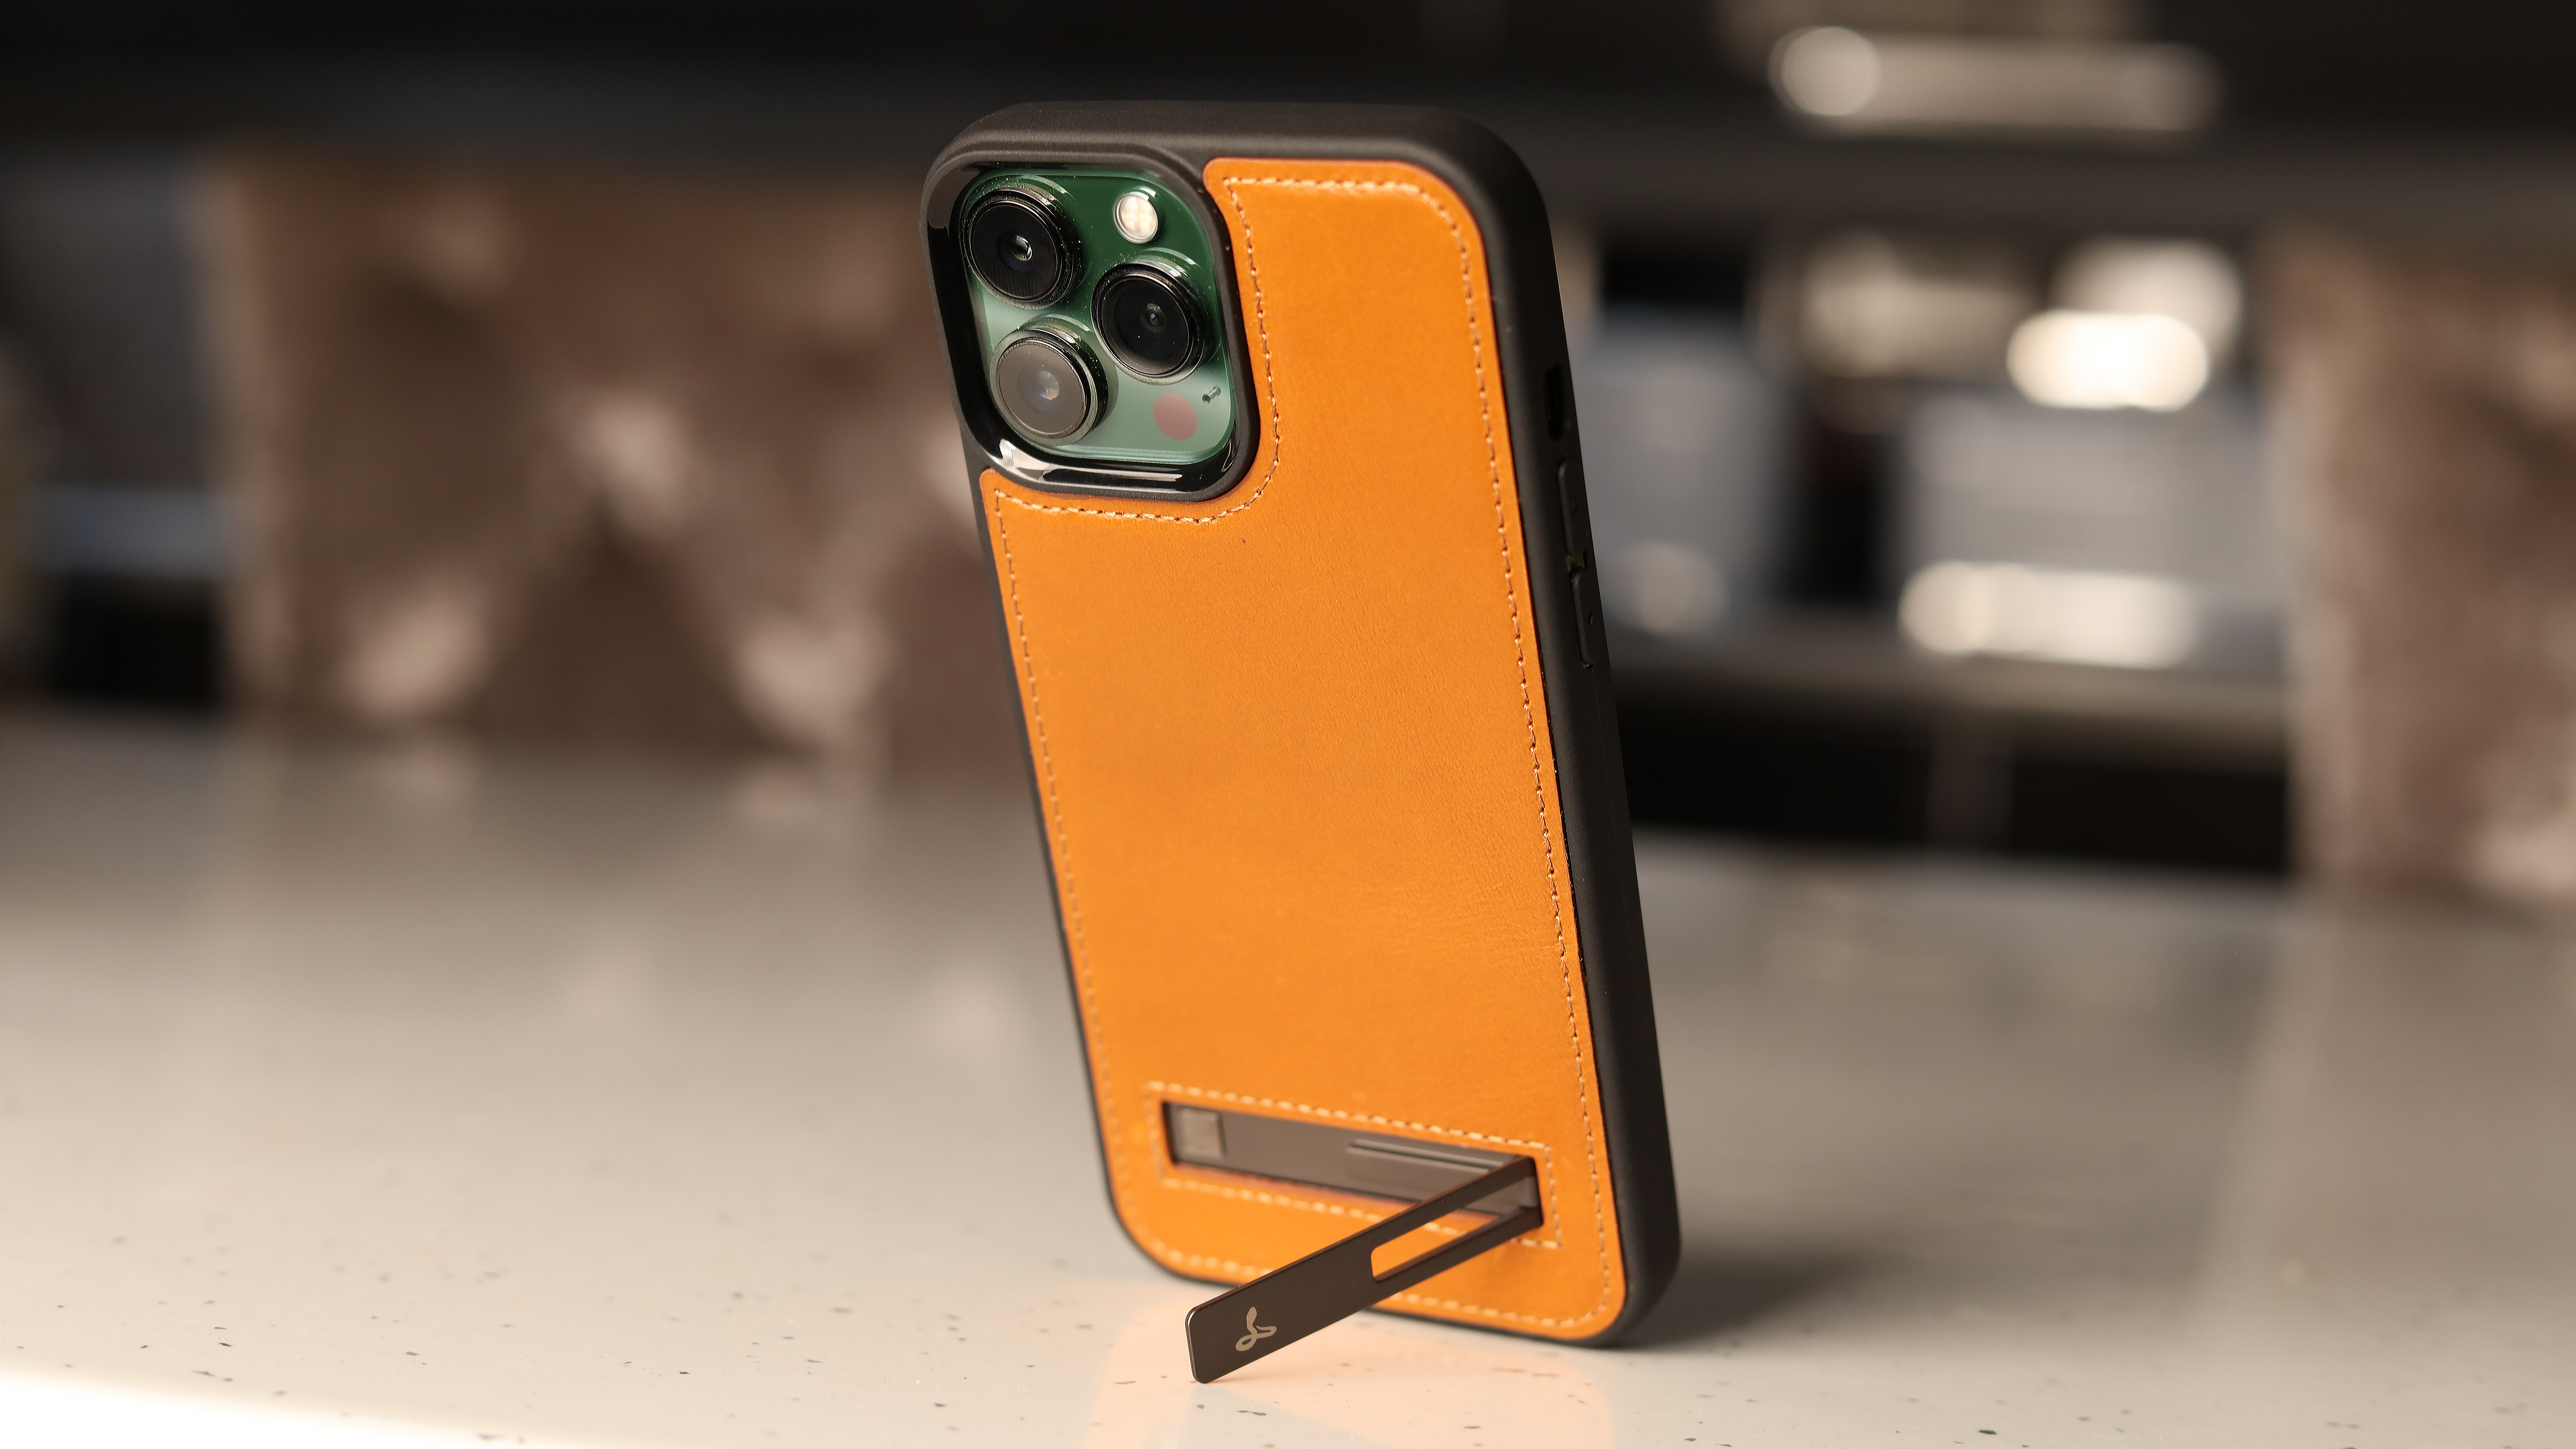 Best iPhone 13 Pro Max cases: Snakehive Metro leather Case